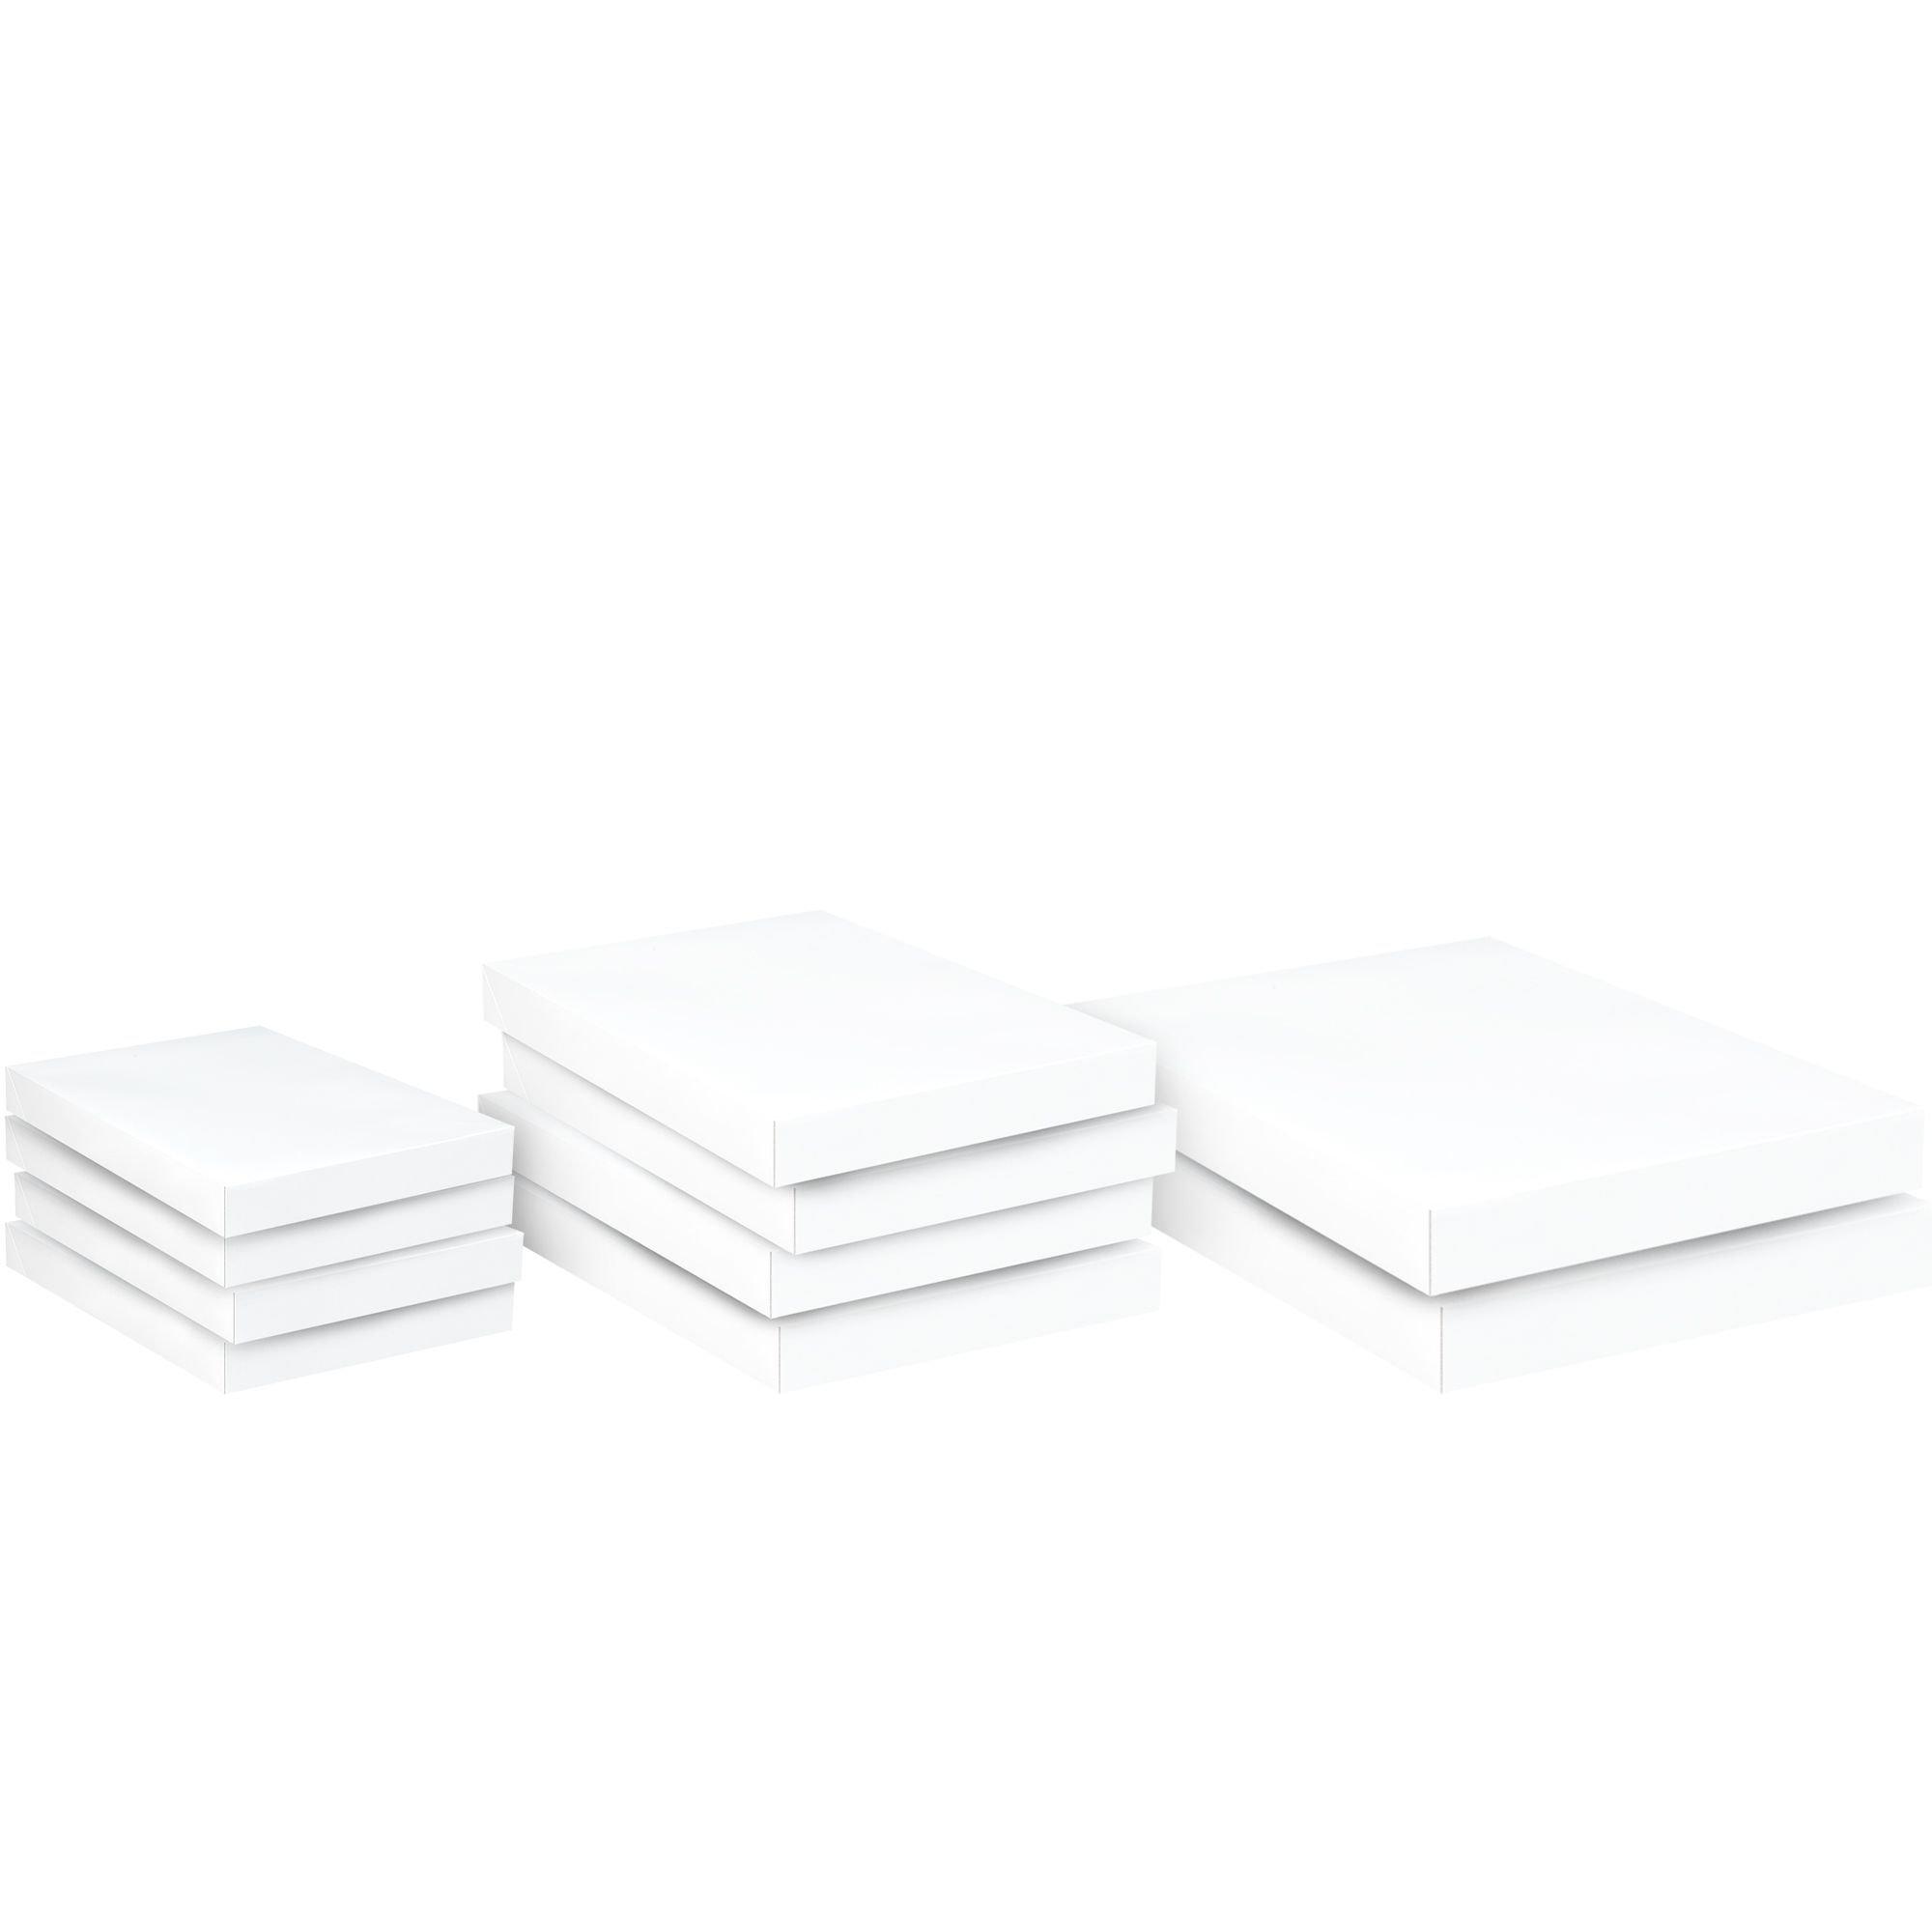 Assorted White Gift Boxes 10ct